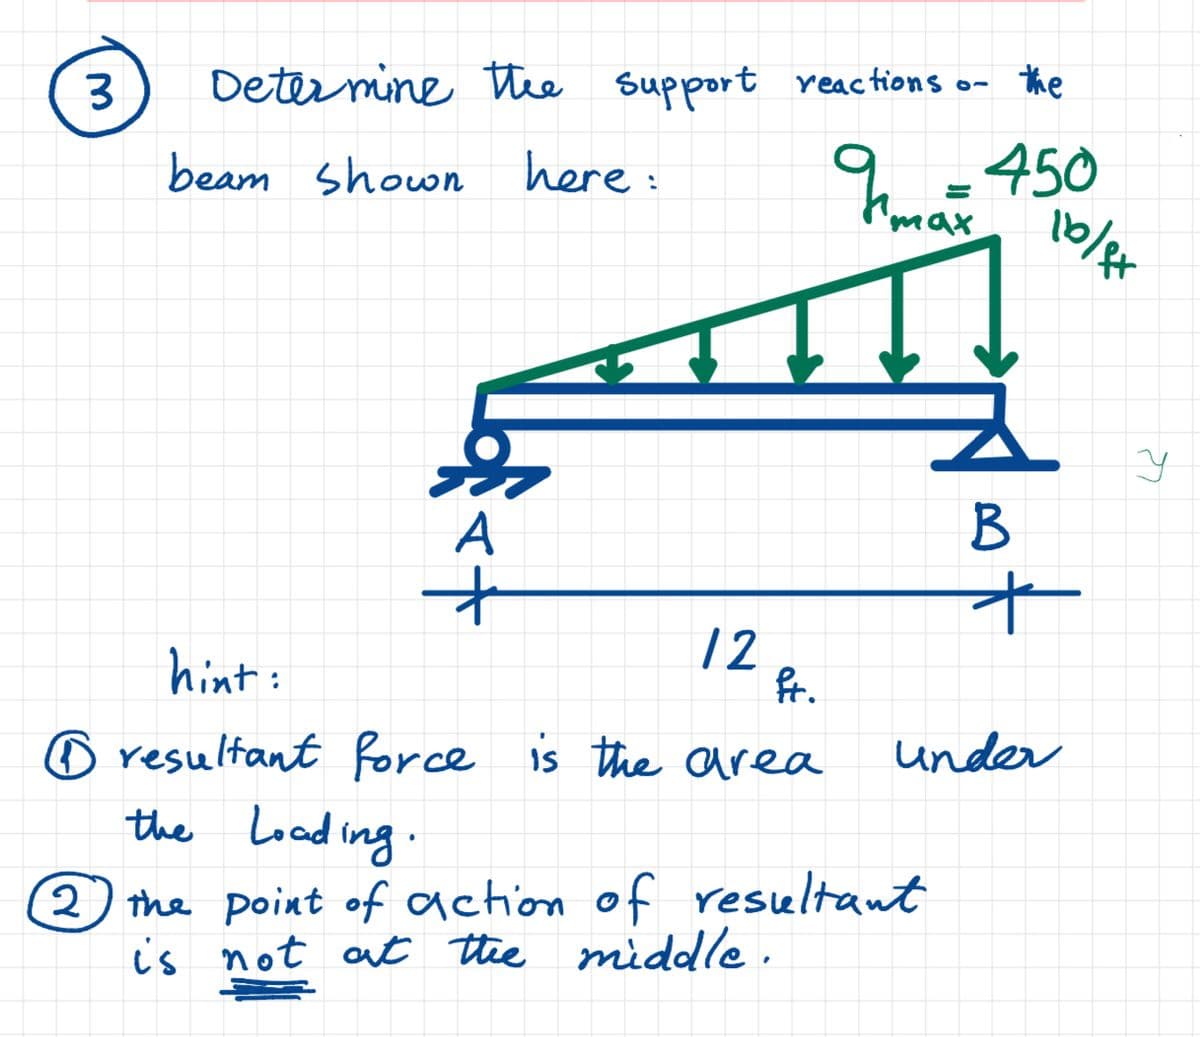 3
Determine the support reactions o-
beam shown here:
S
A
12
the
9 = 450
max.
hint:
1 resultant force is the area
the Loading.
2 the point of action of resultant
is not at the middle.
ft.
B
+
under
16/8x
y